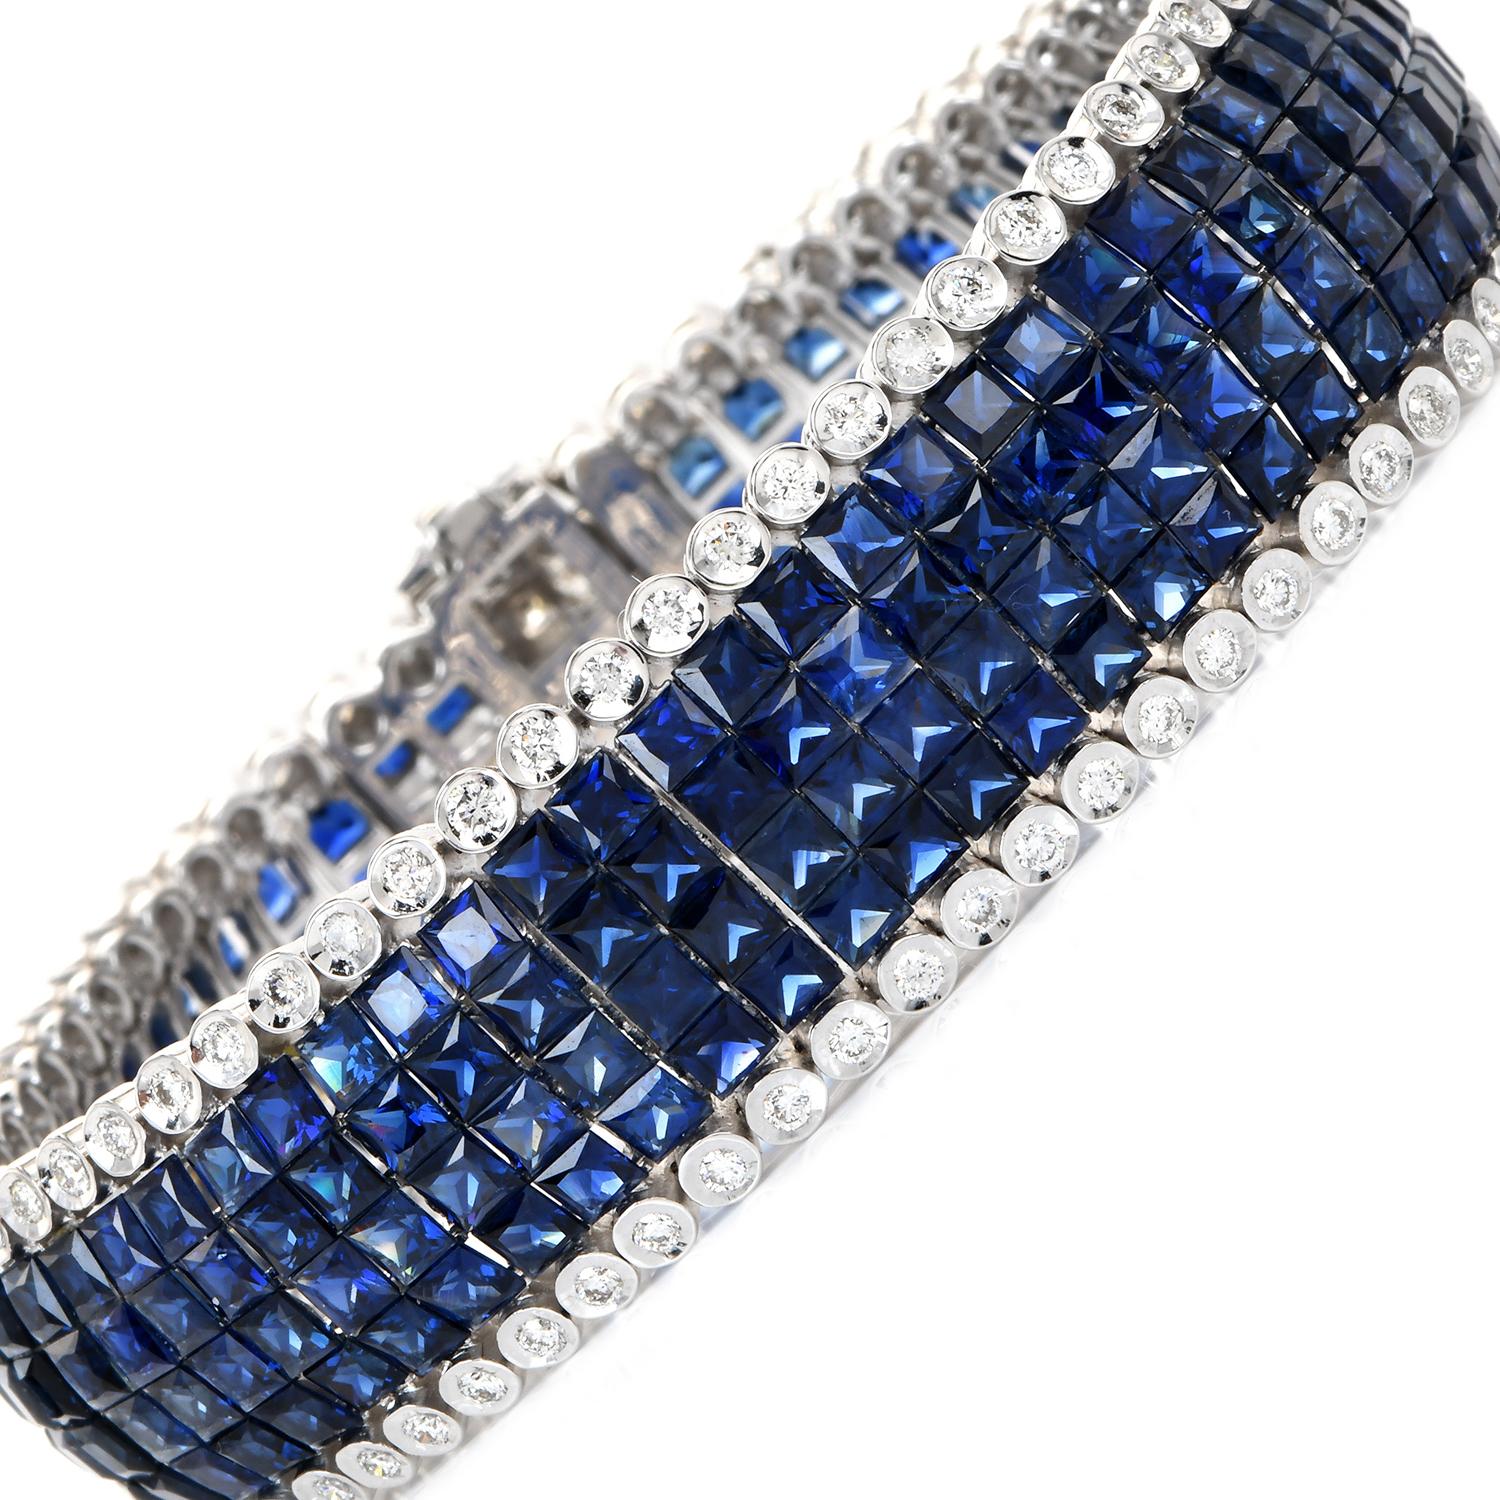 This estate bracelet is composed of a flexible strap of 4 rows of calibré-cut genuine sapphires, bordered by round diamonds. This bracelet is crafted in 18 karats white gold showcasing step-cut blue sapphires, weighing approximately 35.40 carats